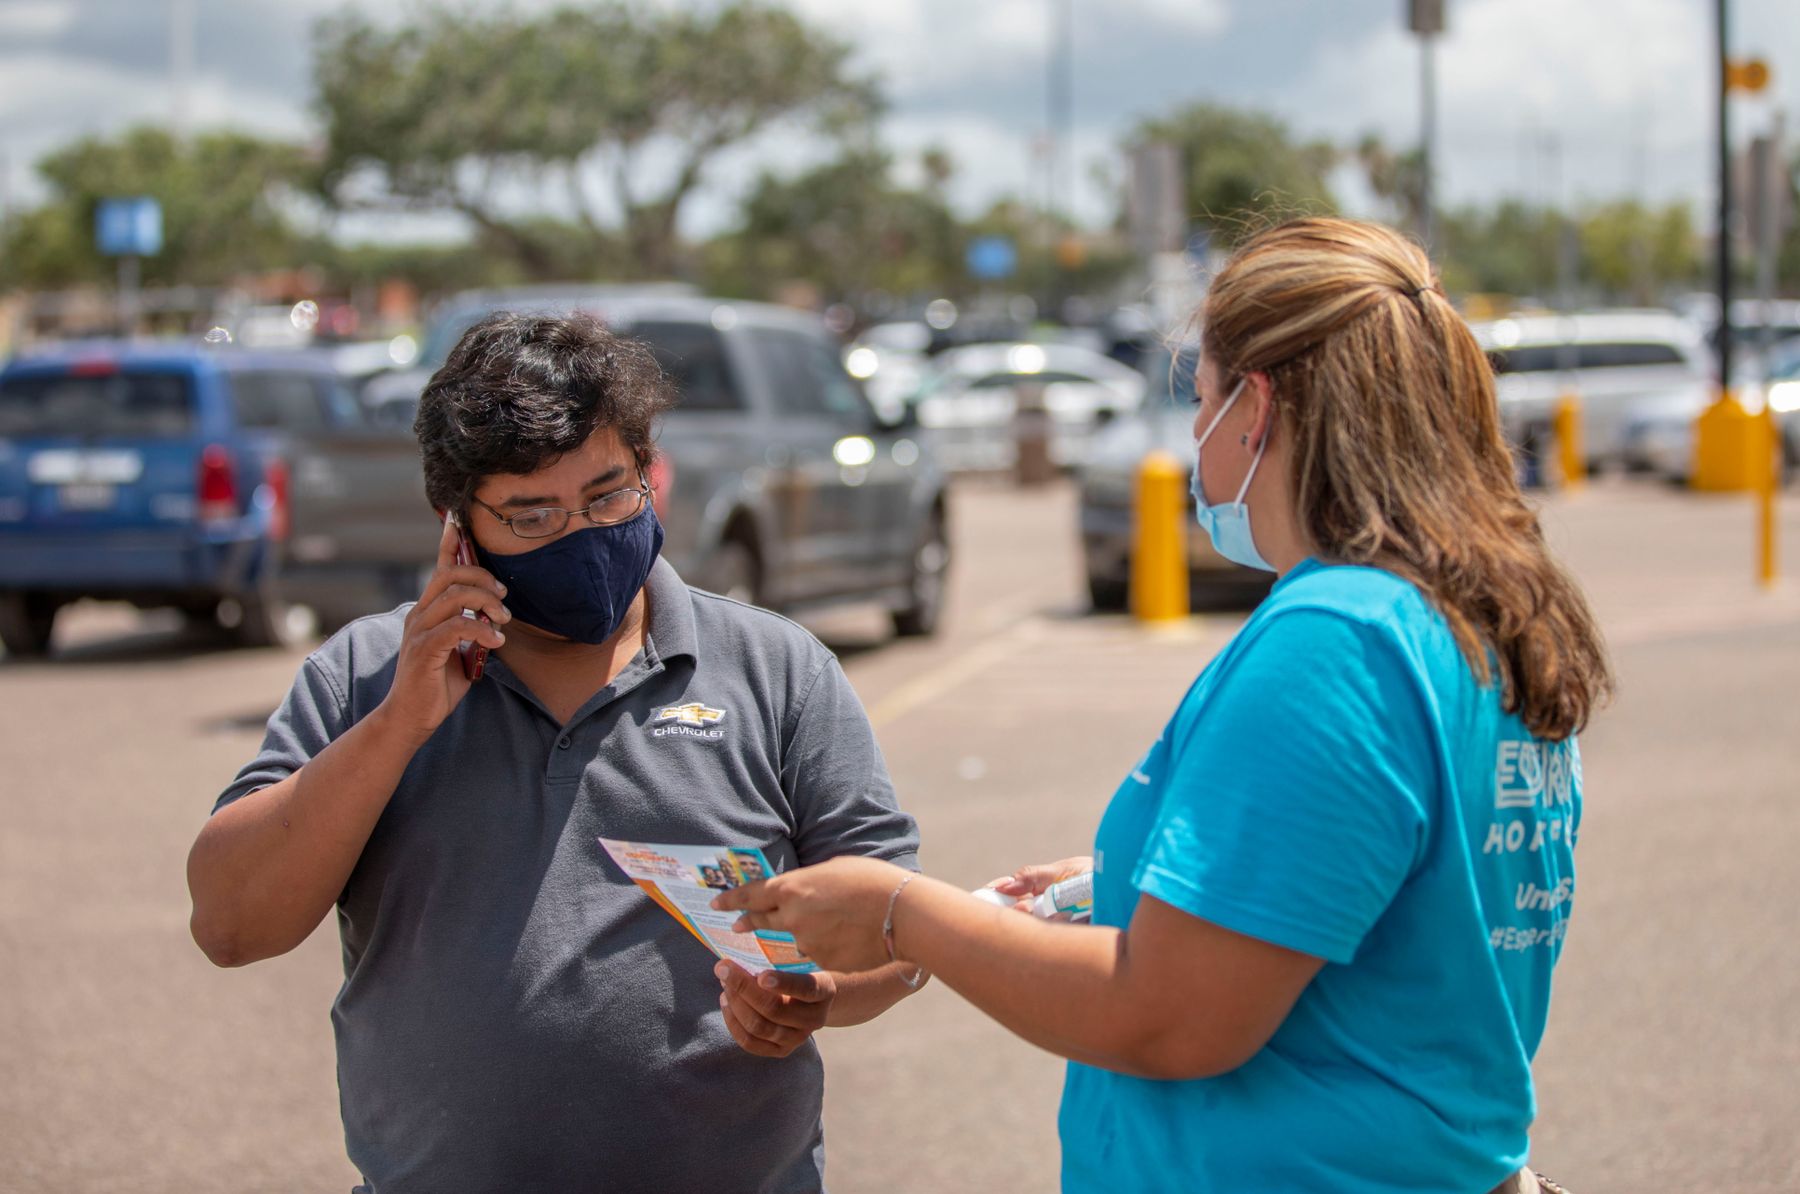 Masked woman working at an Esperanza event shows a Covid vaccine pamphlet to a masked man talking on a phone.